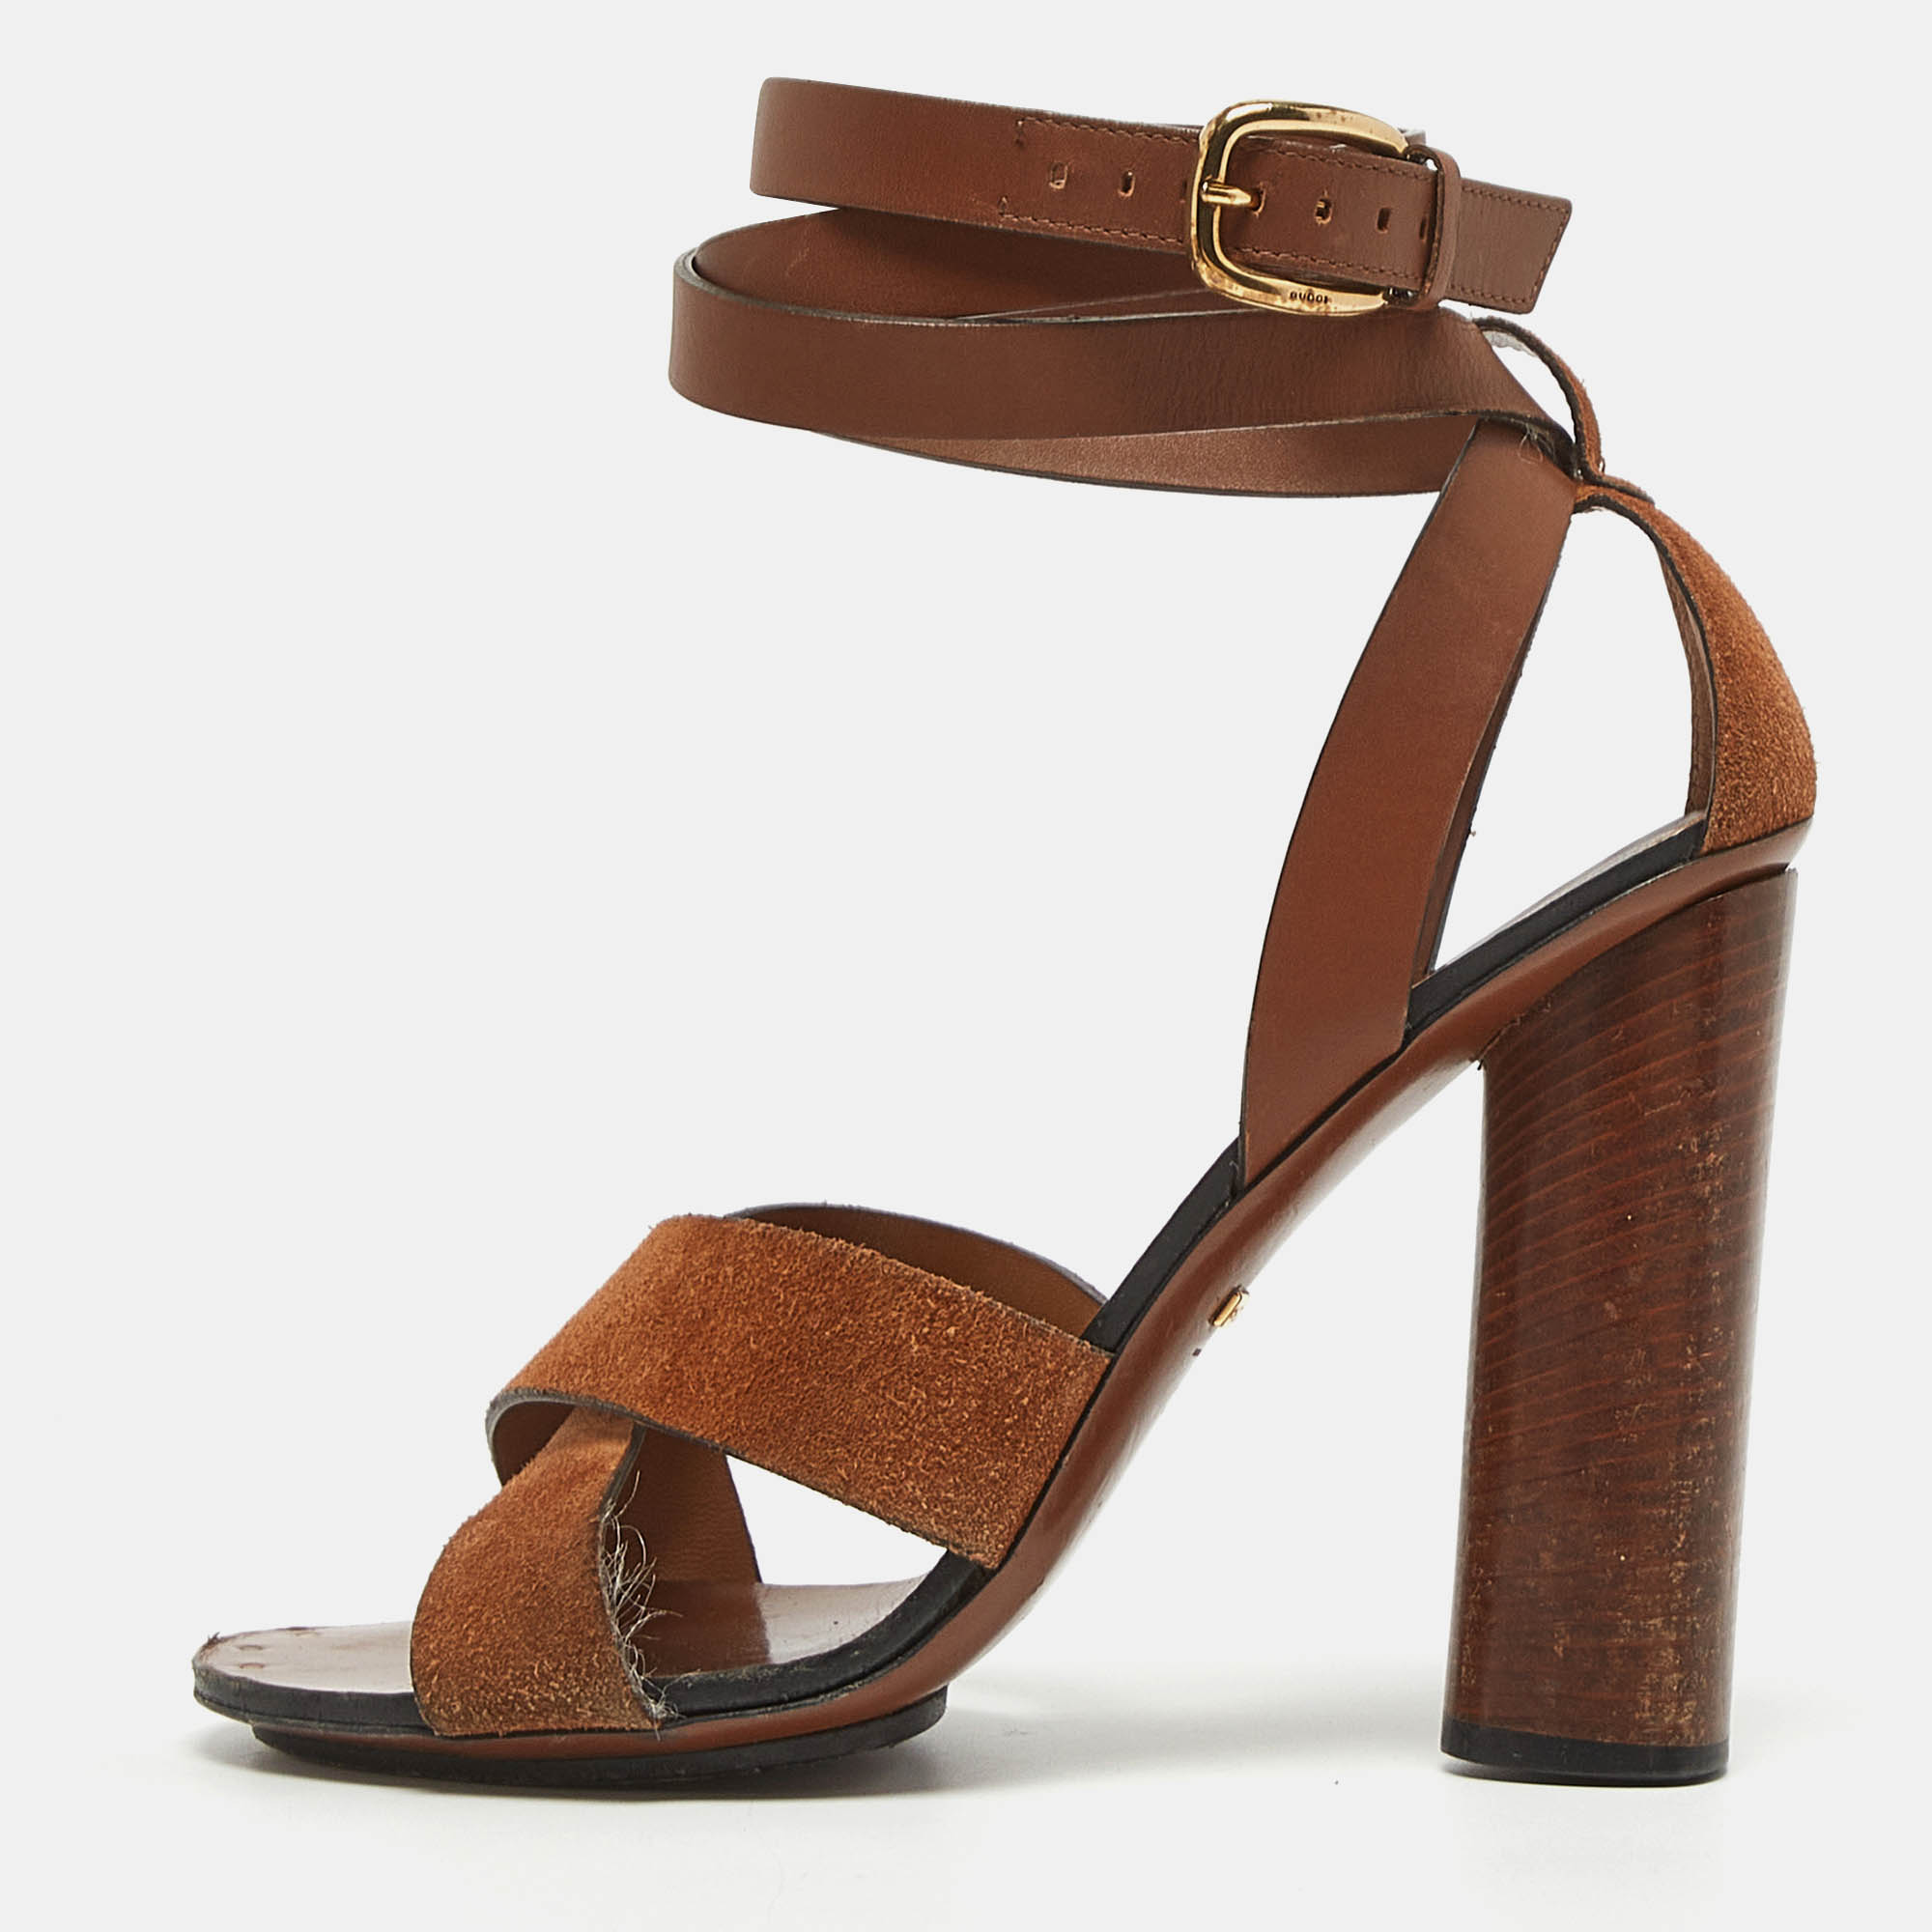 Gucci brown leather and suede ankle strap sandals size 39